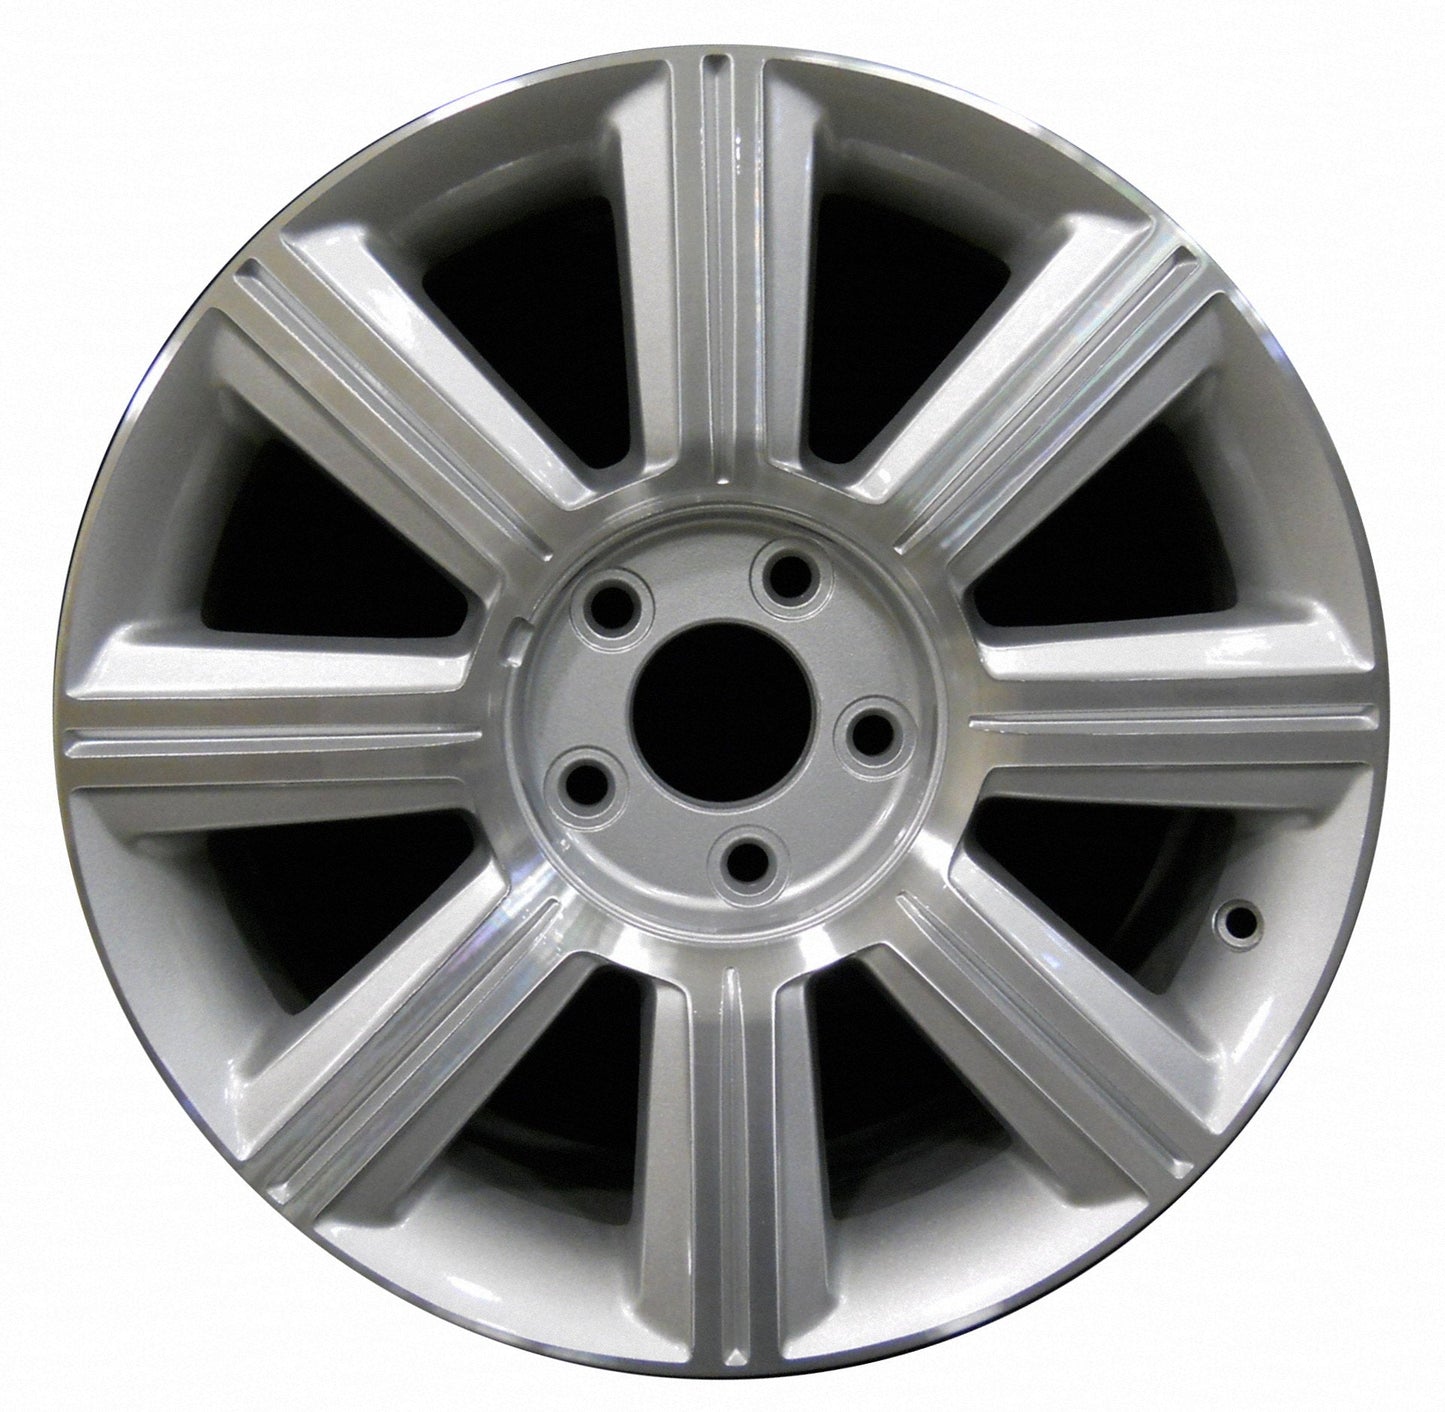 Lincoln MKZ  2007, 2008, 2009 Factory OEM Car Wheel Size 17x7.5 Alloy WAO.3656.PS09.MA